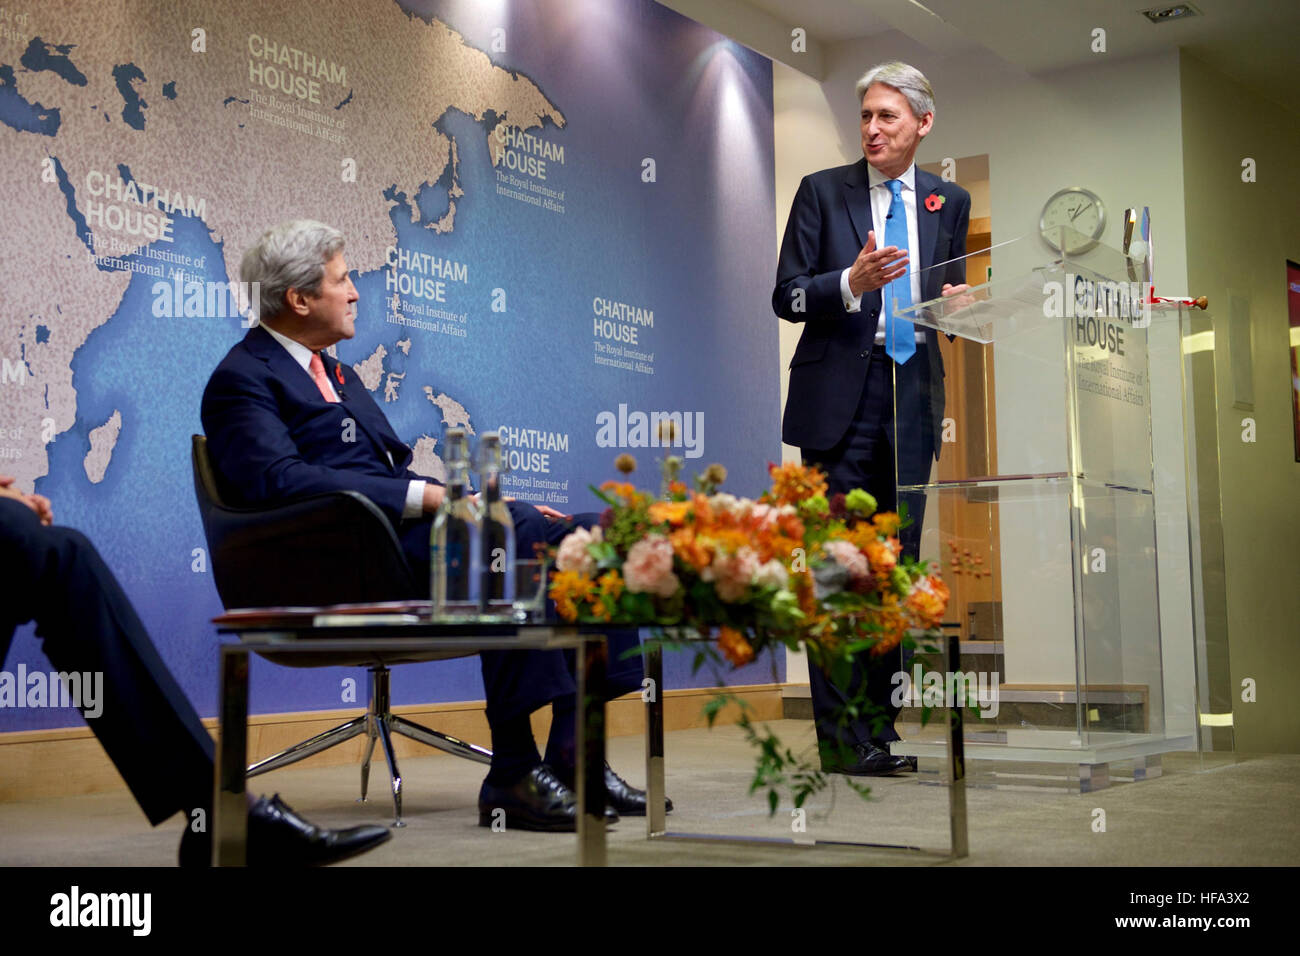 U.S. Secretary of State John Kerry listens as his former counterpart, British Chancellor of the Exchequer Philip Hammond, makes remarks before the Secretary and Iranian Foreign Minister Javad Zarif received the Chatham House Prize from the famed international think-tank in London, U.K., on October 31, 2016. Stock Photo